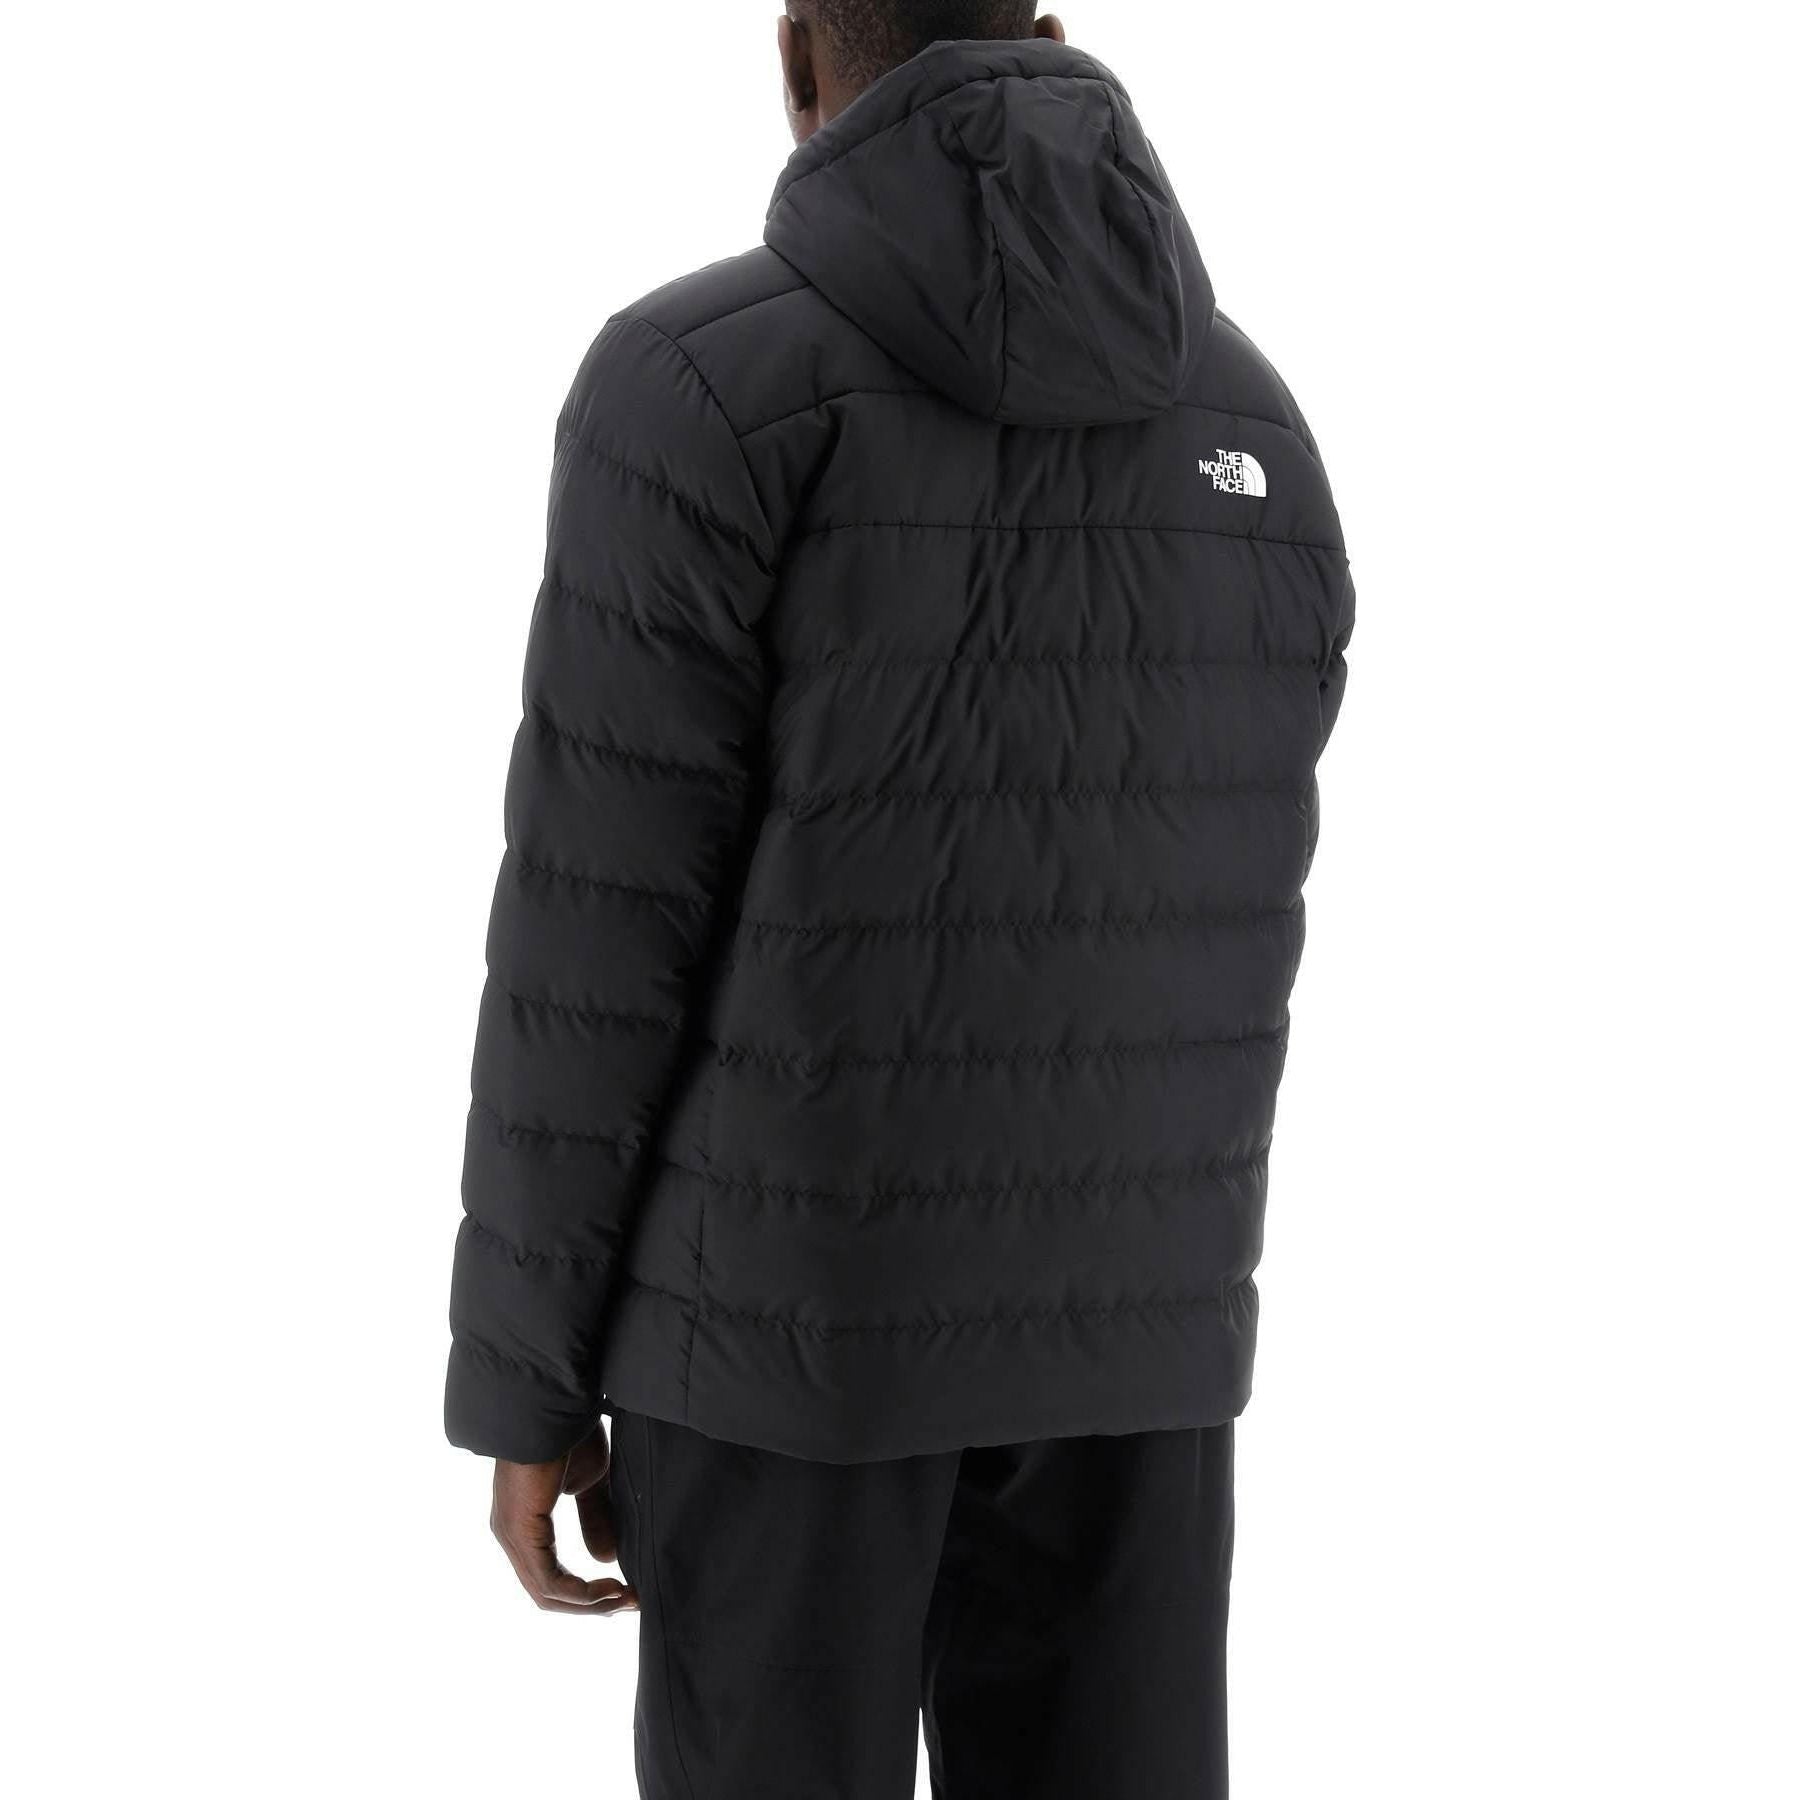 Black Aconcagua Iii Lightweight Puffer Jacket with recycled down THE NORTH FACE JOHN JULIA.